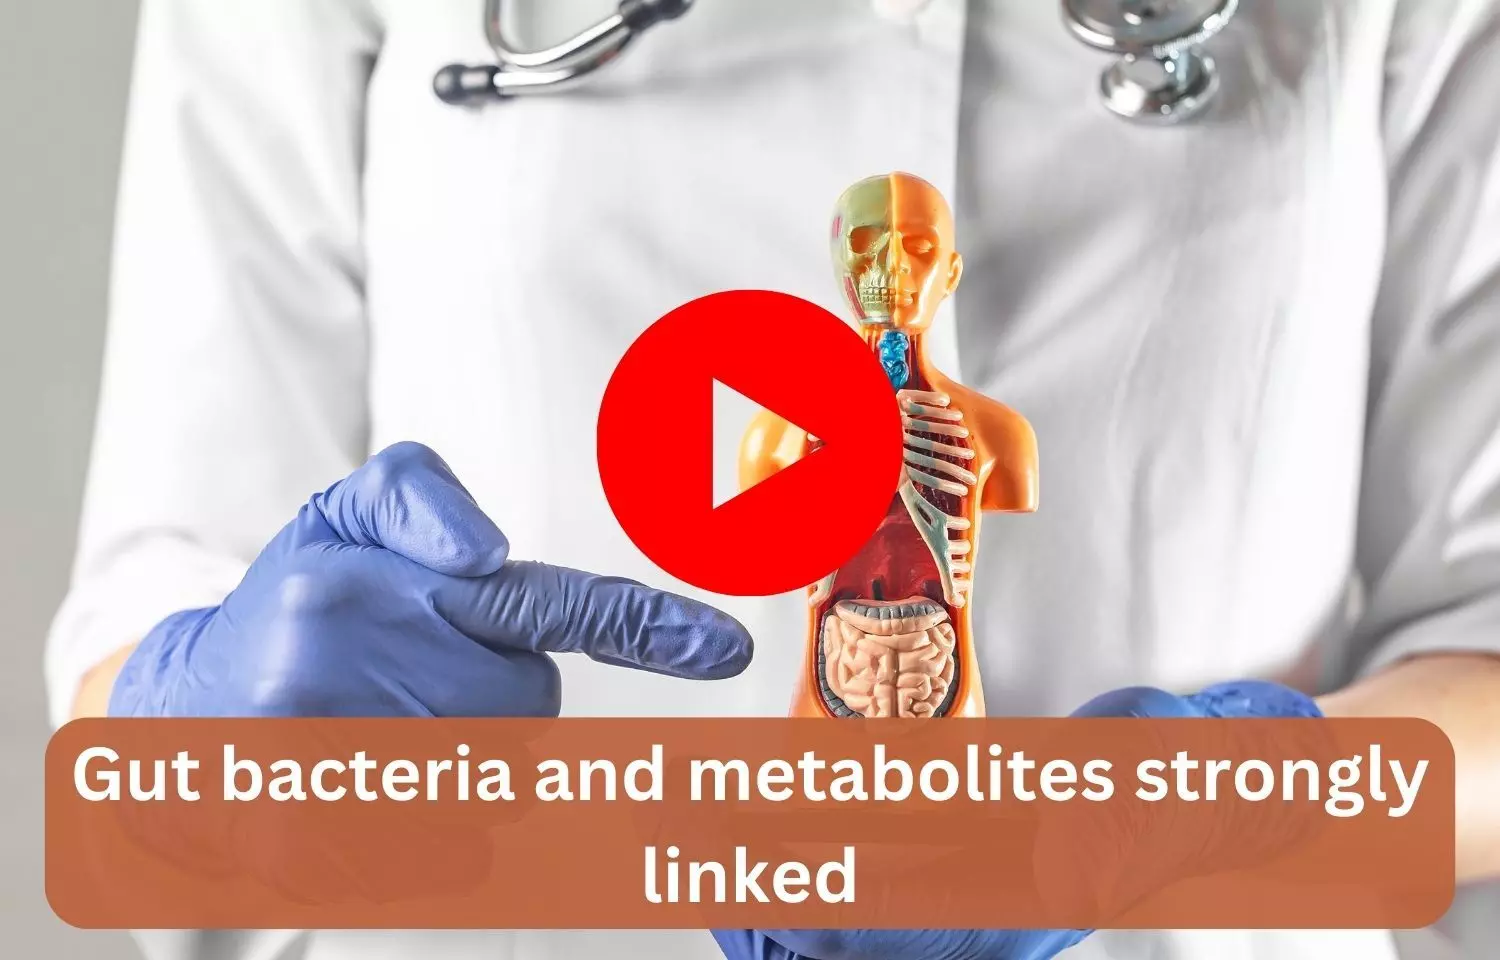 Gut bacteria and metabolites strongly linked